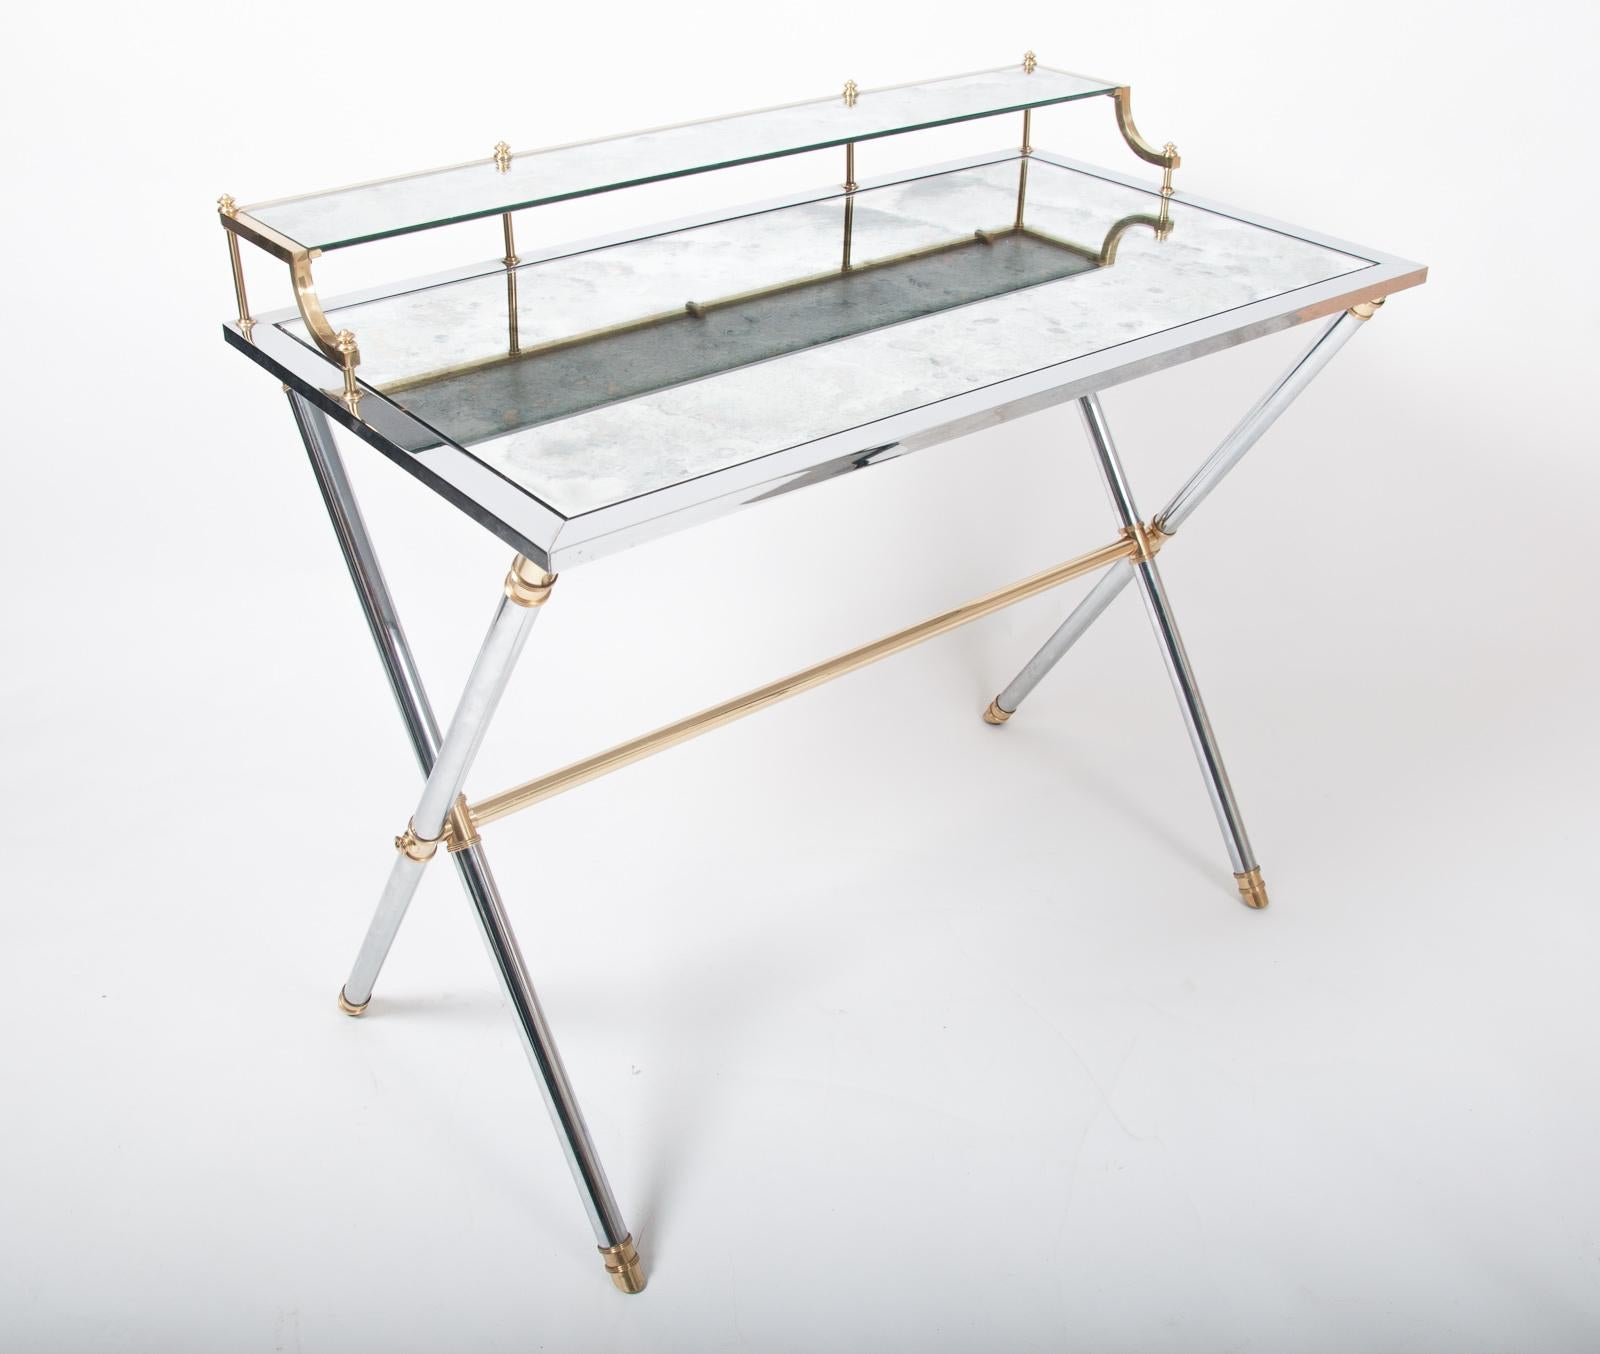 French Brass and Steel Desk 1970s by Maison Jansen